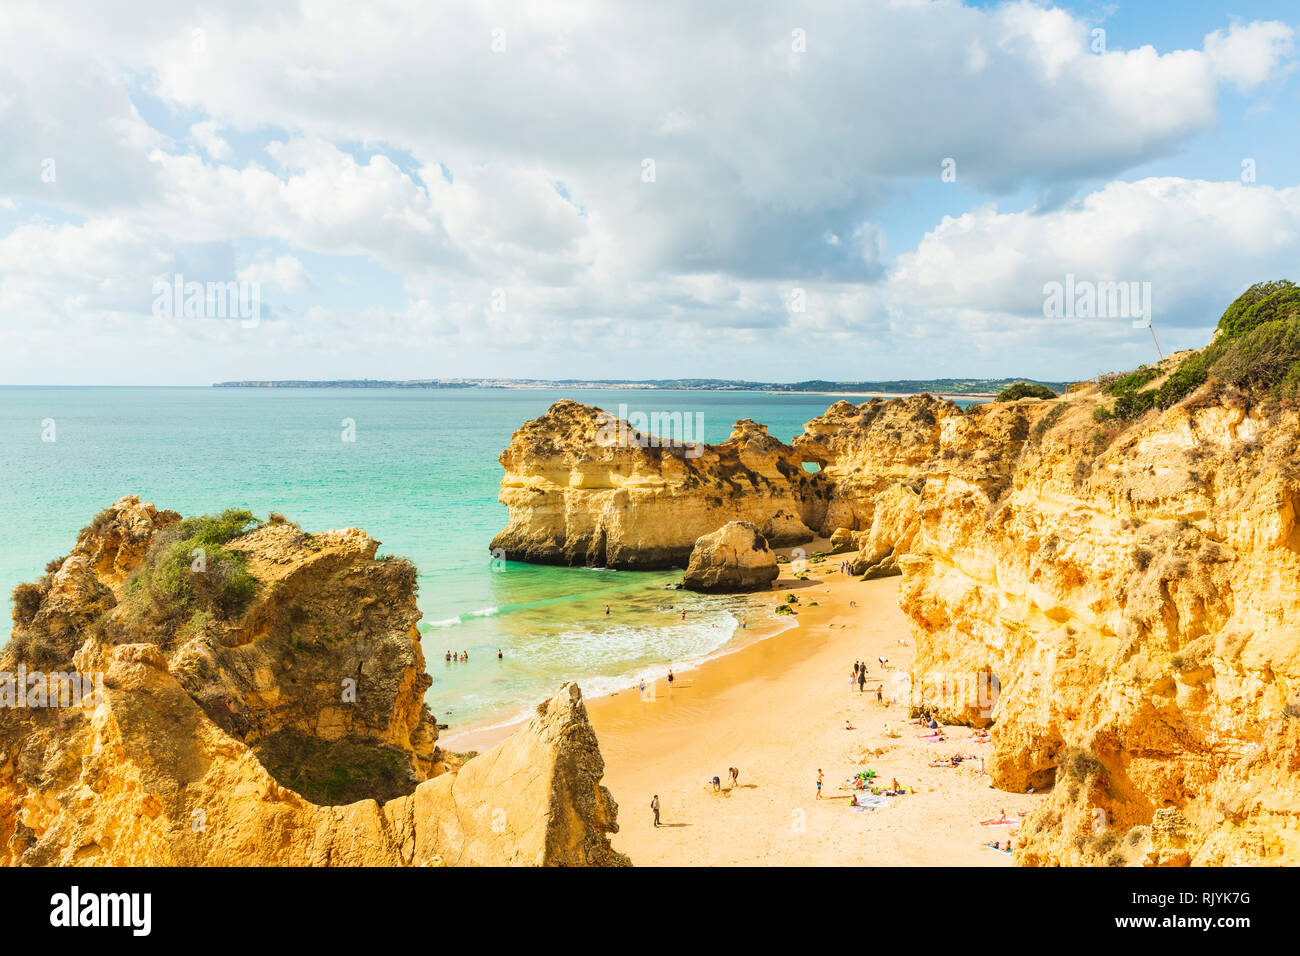 Sunbathers relaxing on sandy beach by sandstone cliffs, Alvor, Agarve, Portugal, Europe Stock Photo